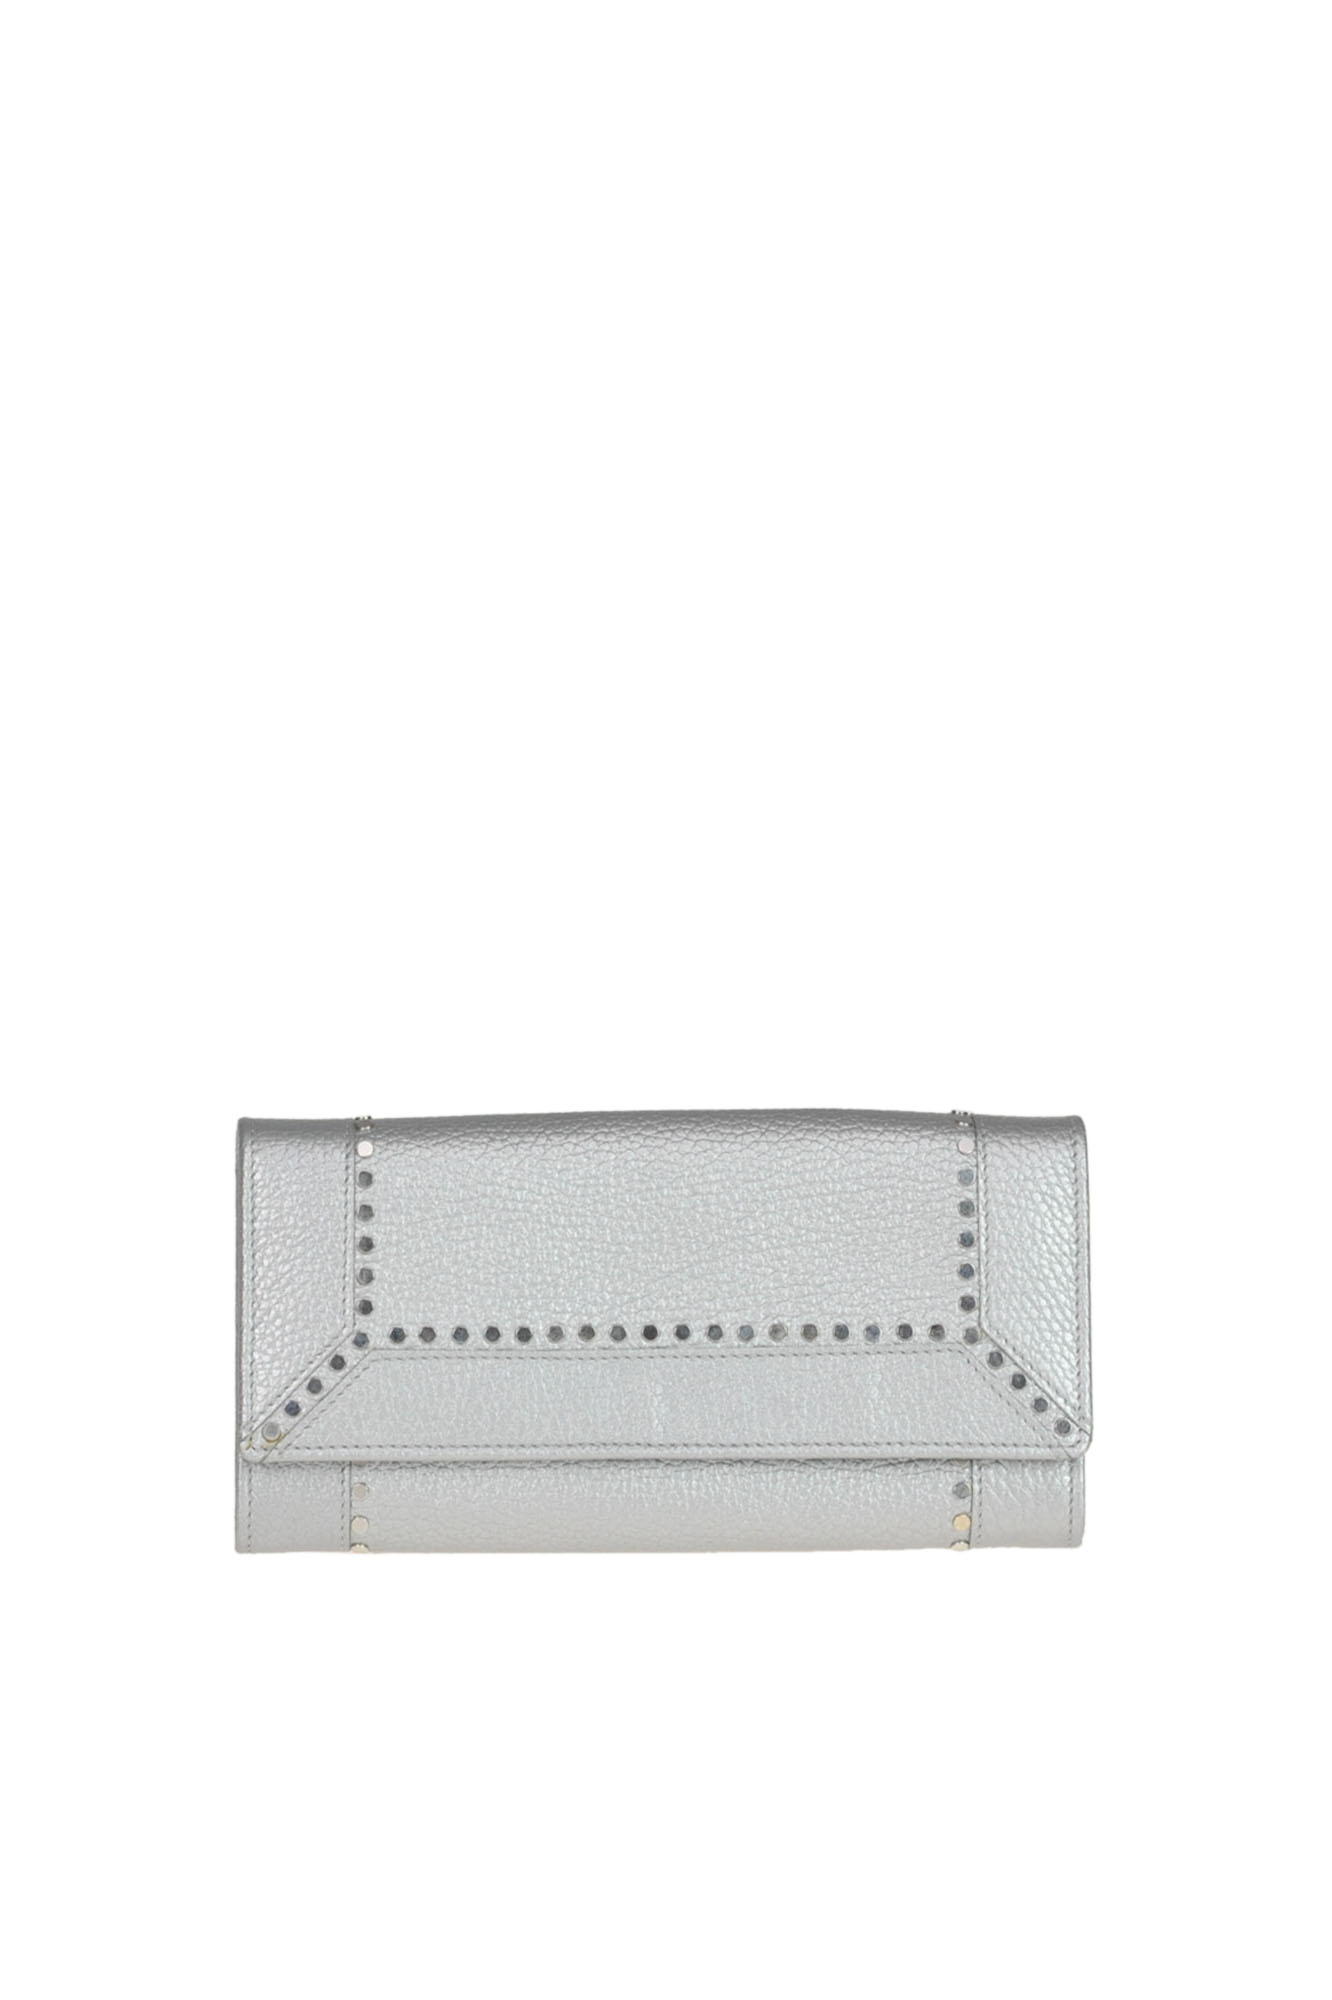 ORCIANI METALLIC EFFECT LEATHER WALLET WITH STUDS